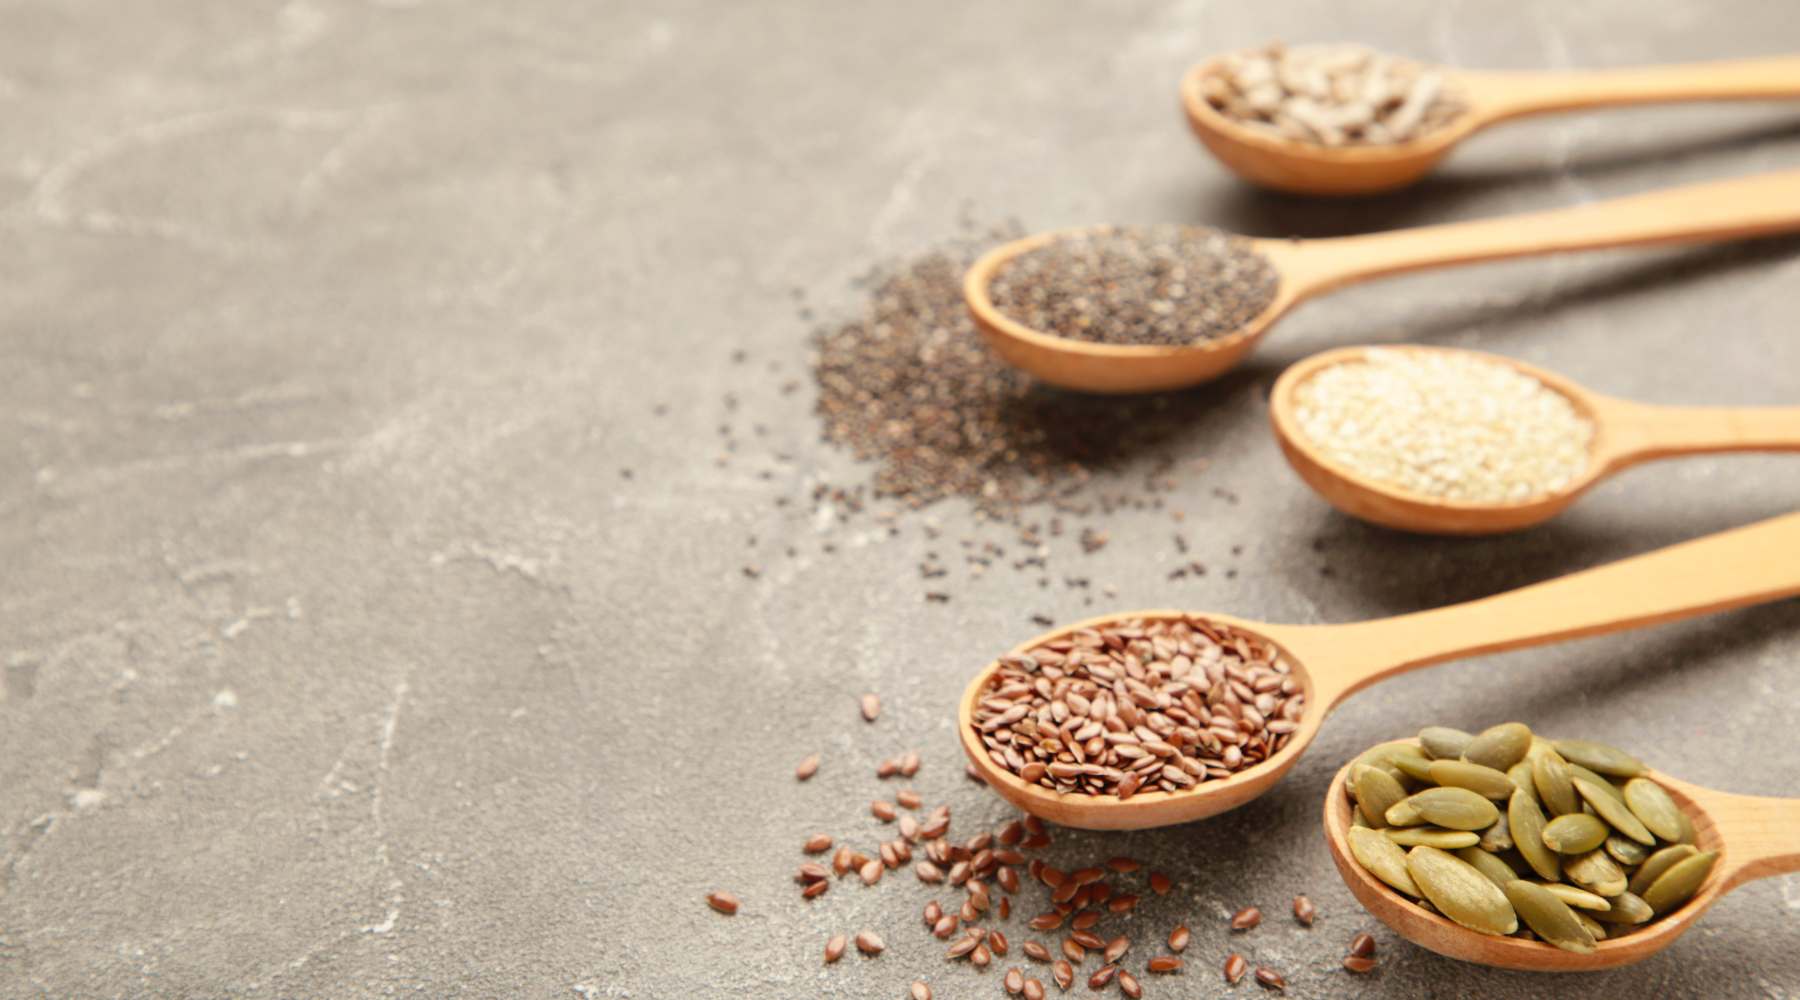 Six Of The Best Seeds For Smoothies To Make Them Nutritional Bombs!